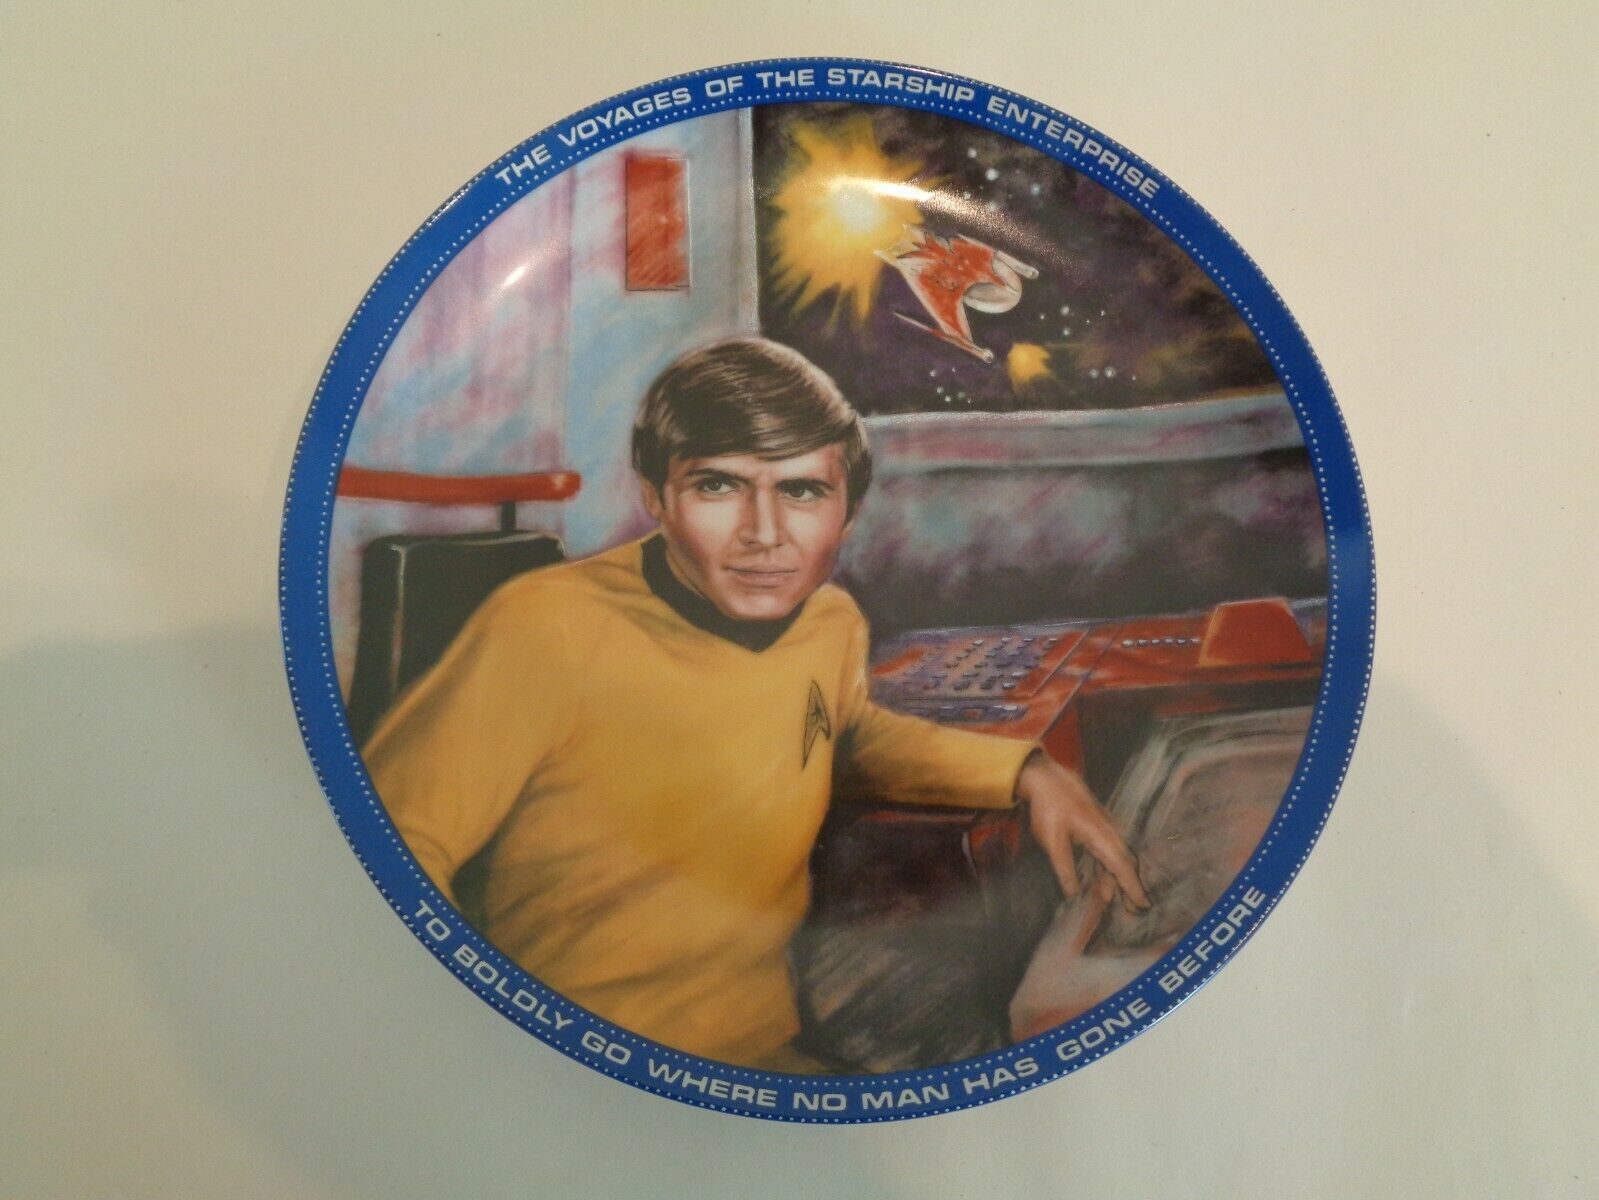 Primary image for CHEKOV Star Trek Collection Plate by The Hamilton Collection Plate Number 0984R